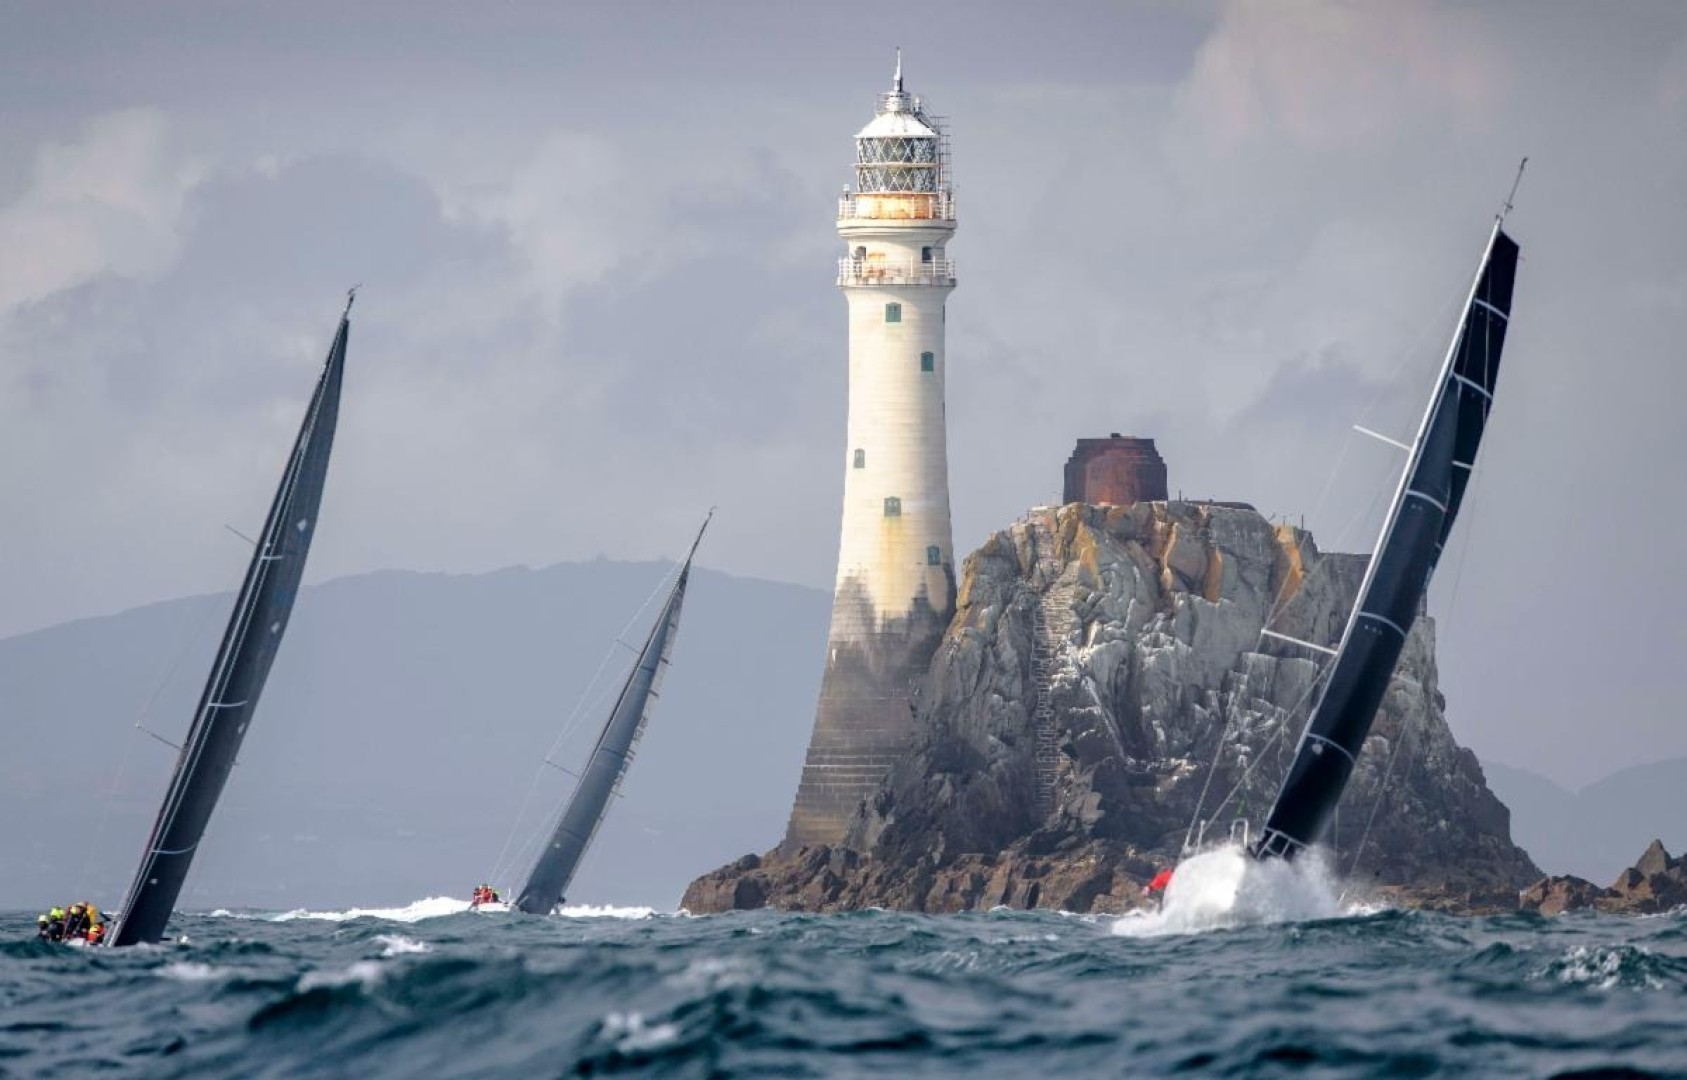 The 50th edition of the Rolex Fastnet Race is on course for record entry © Kurt Arrigo/ROLEX